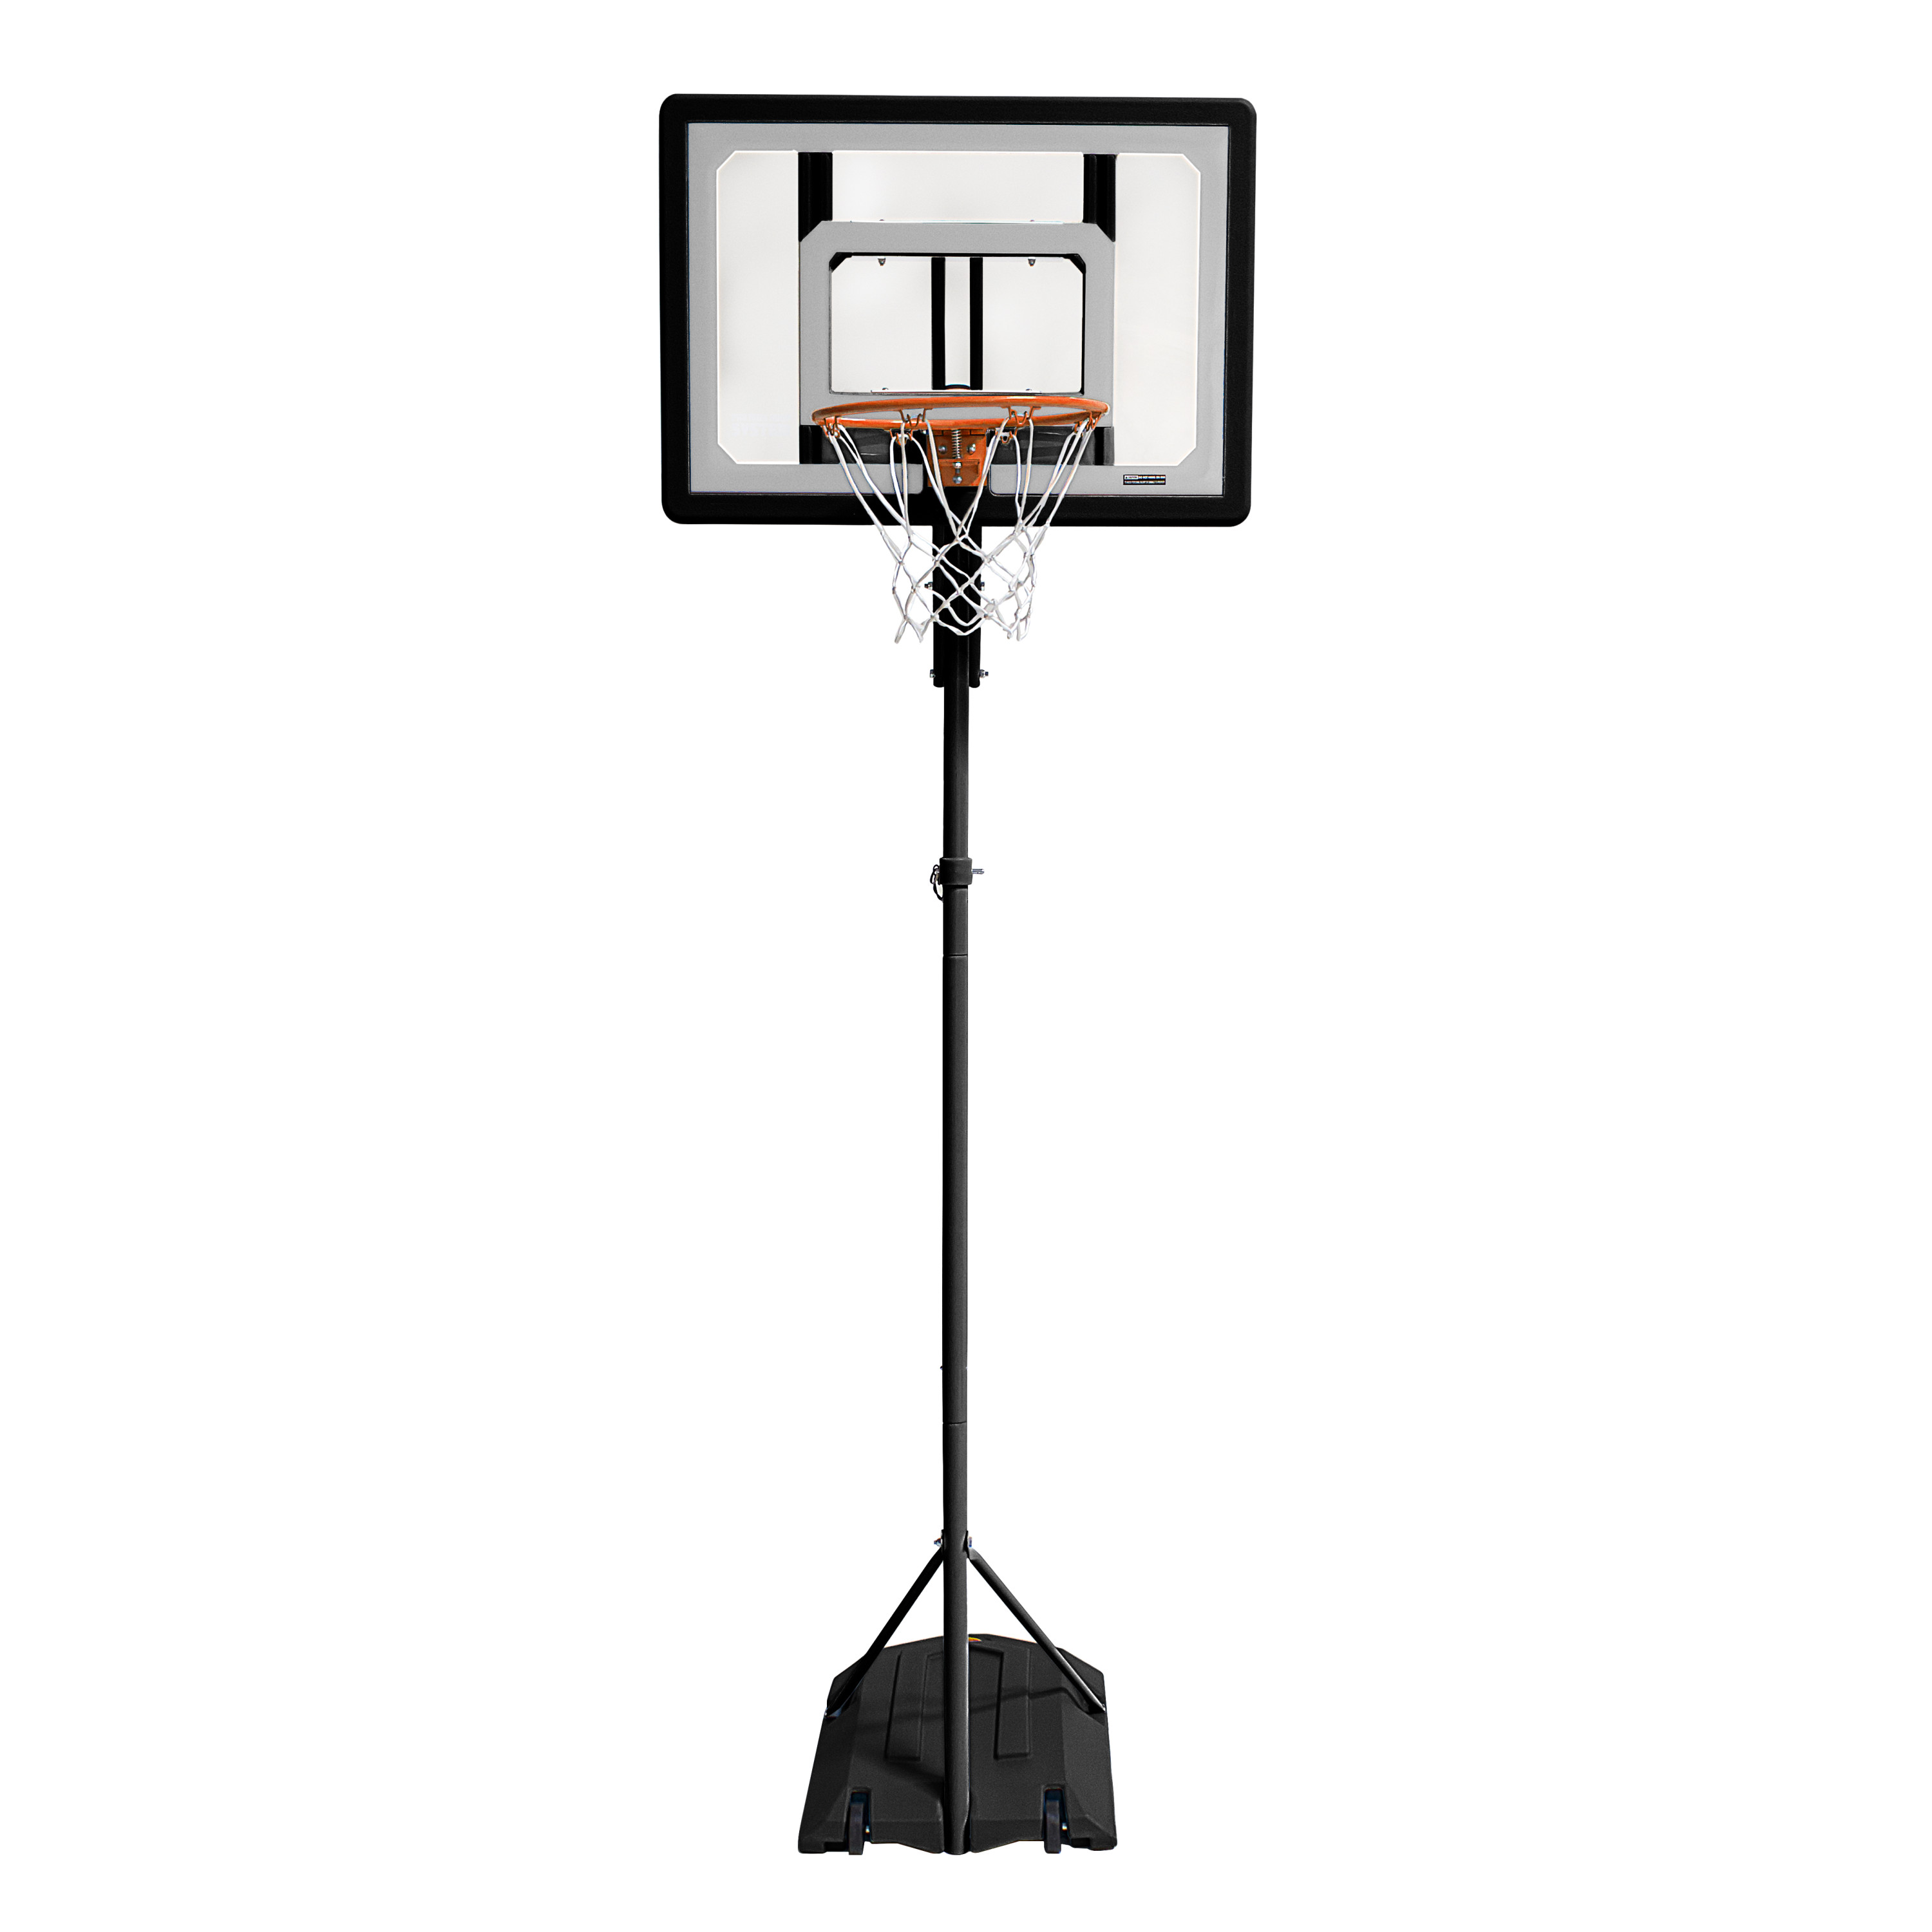 SKLZ Pro Mini Portable Basketball System Hoop with Adjustable Height 3.5 to 7 Ft., Includes 7 In. Mini Ball - image 5 of 12